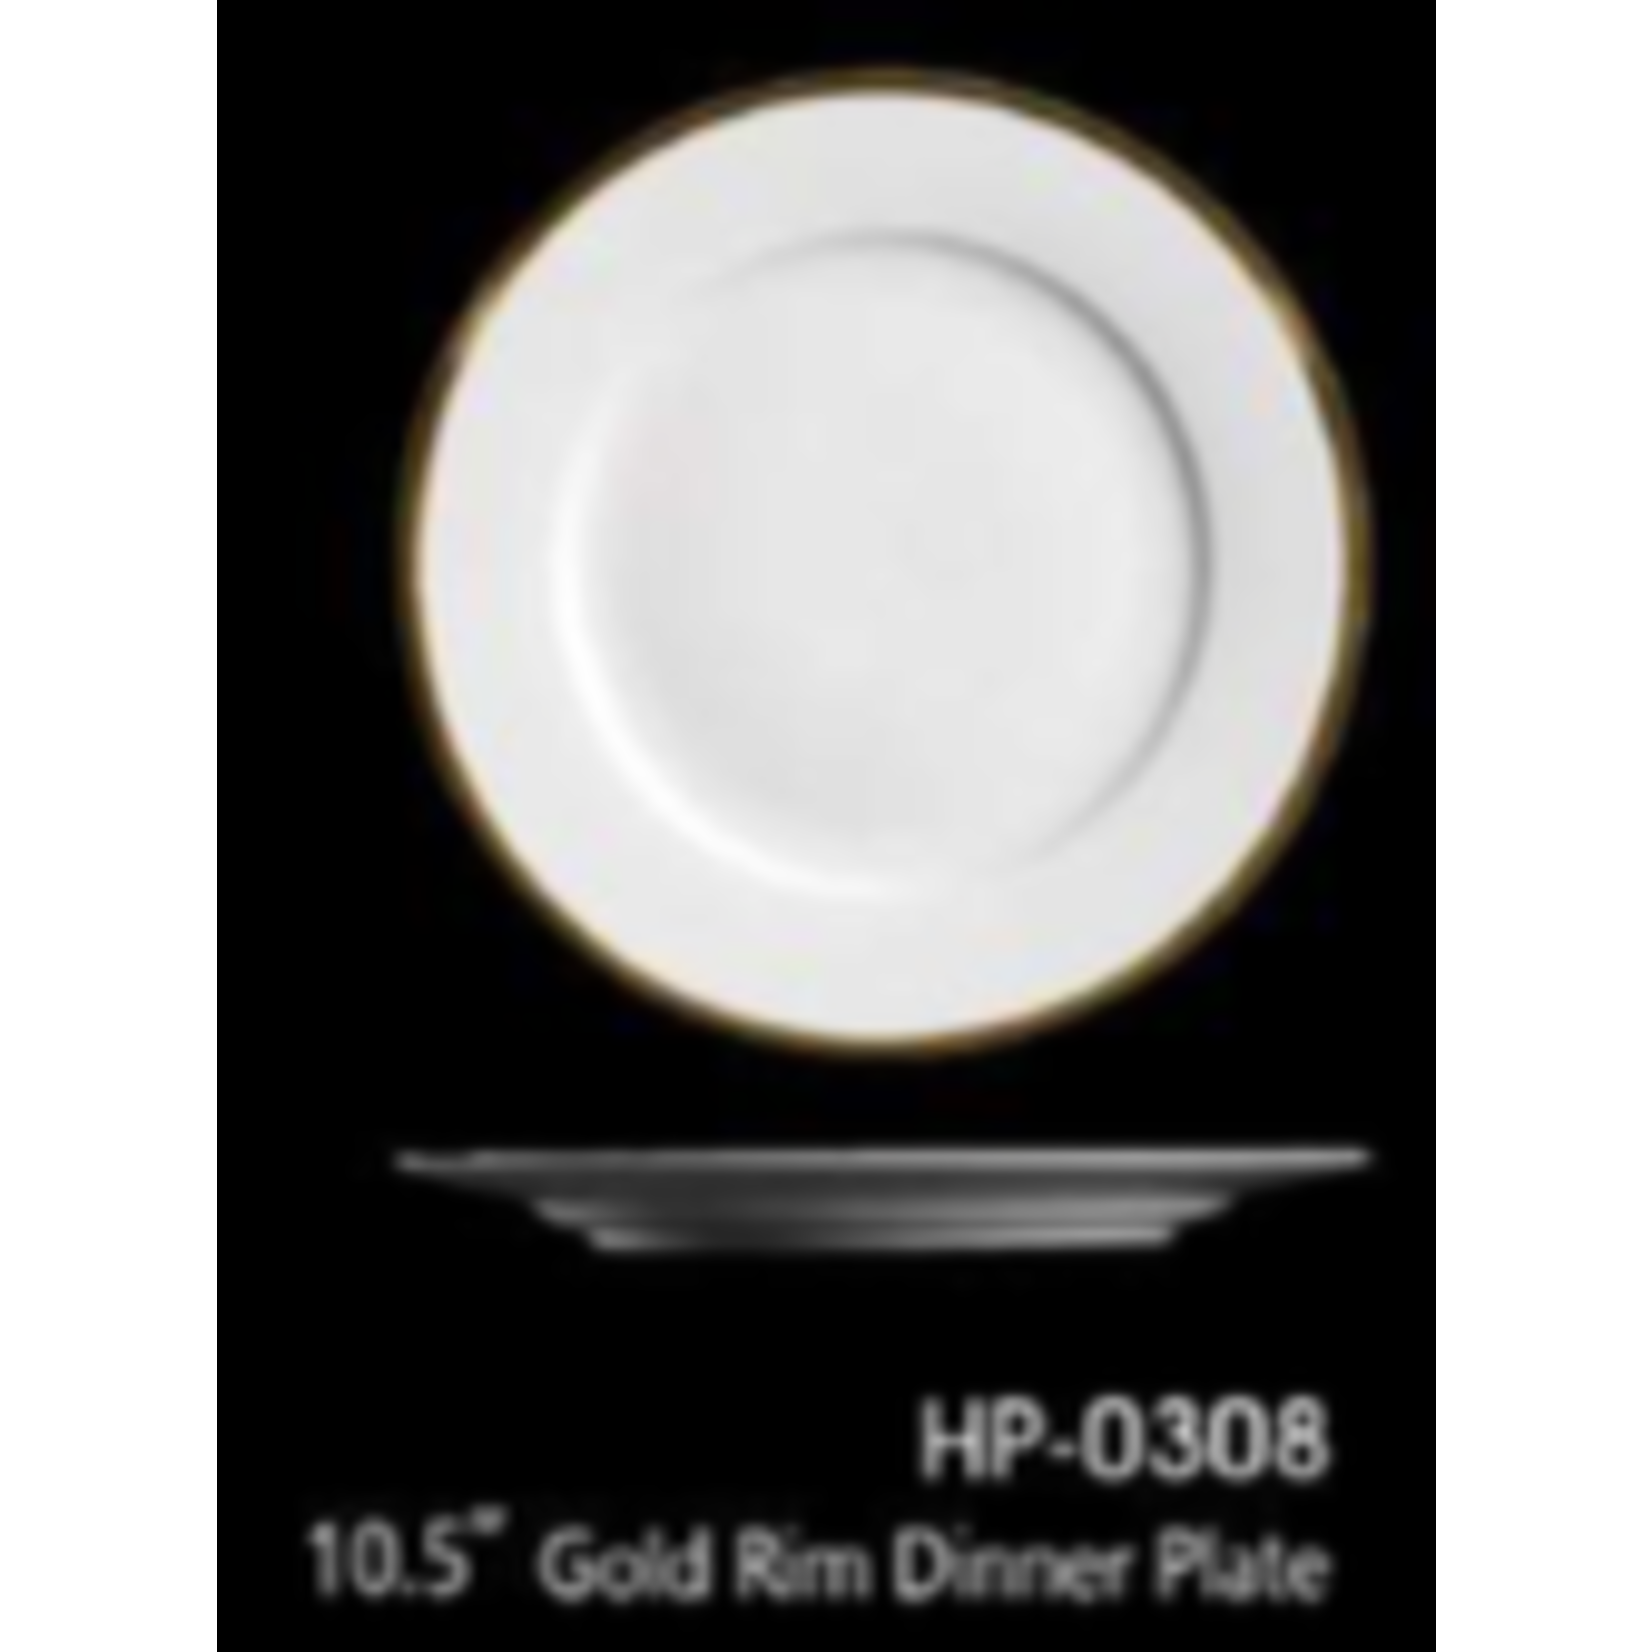 Palate and Plate Special order HP-0308 10.5" Dinner  plate gold rim 12/case PROMO